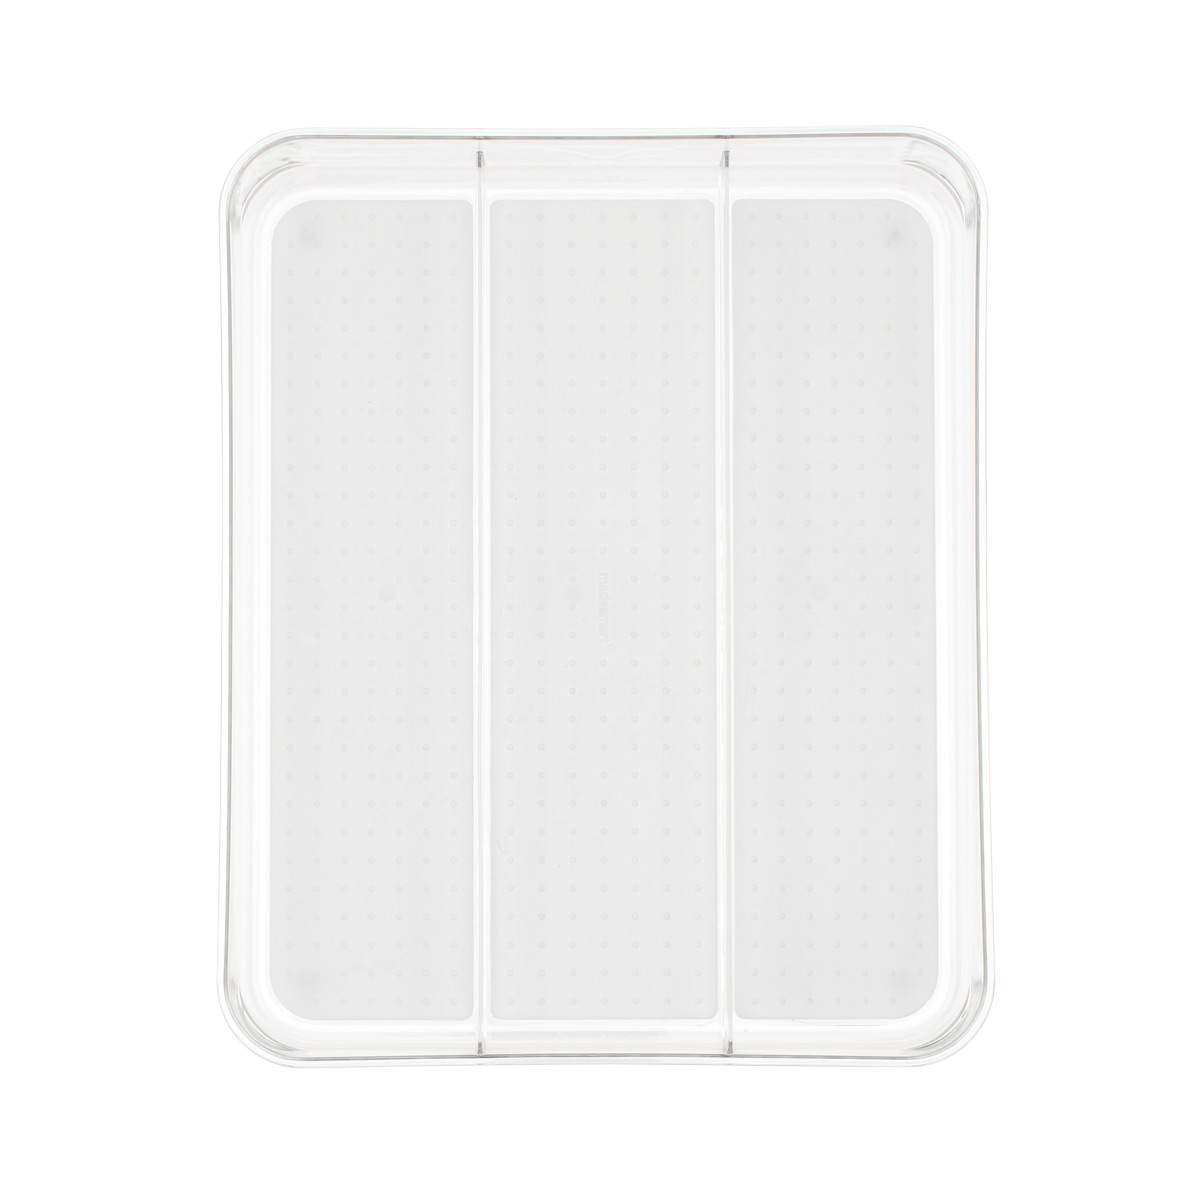 madesmart Large Utensil Tray Clear/White